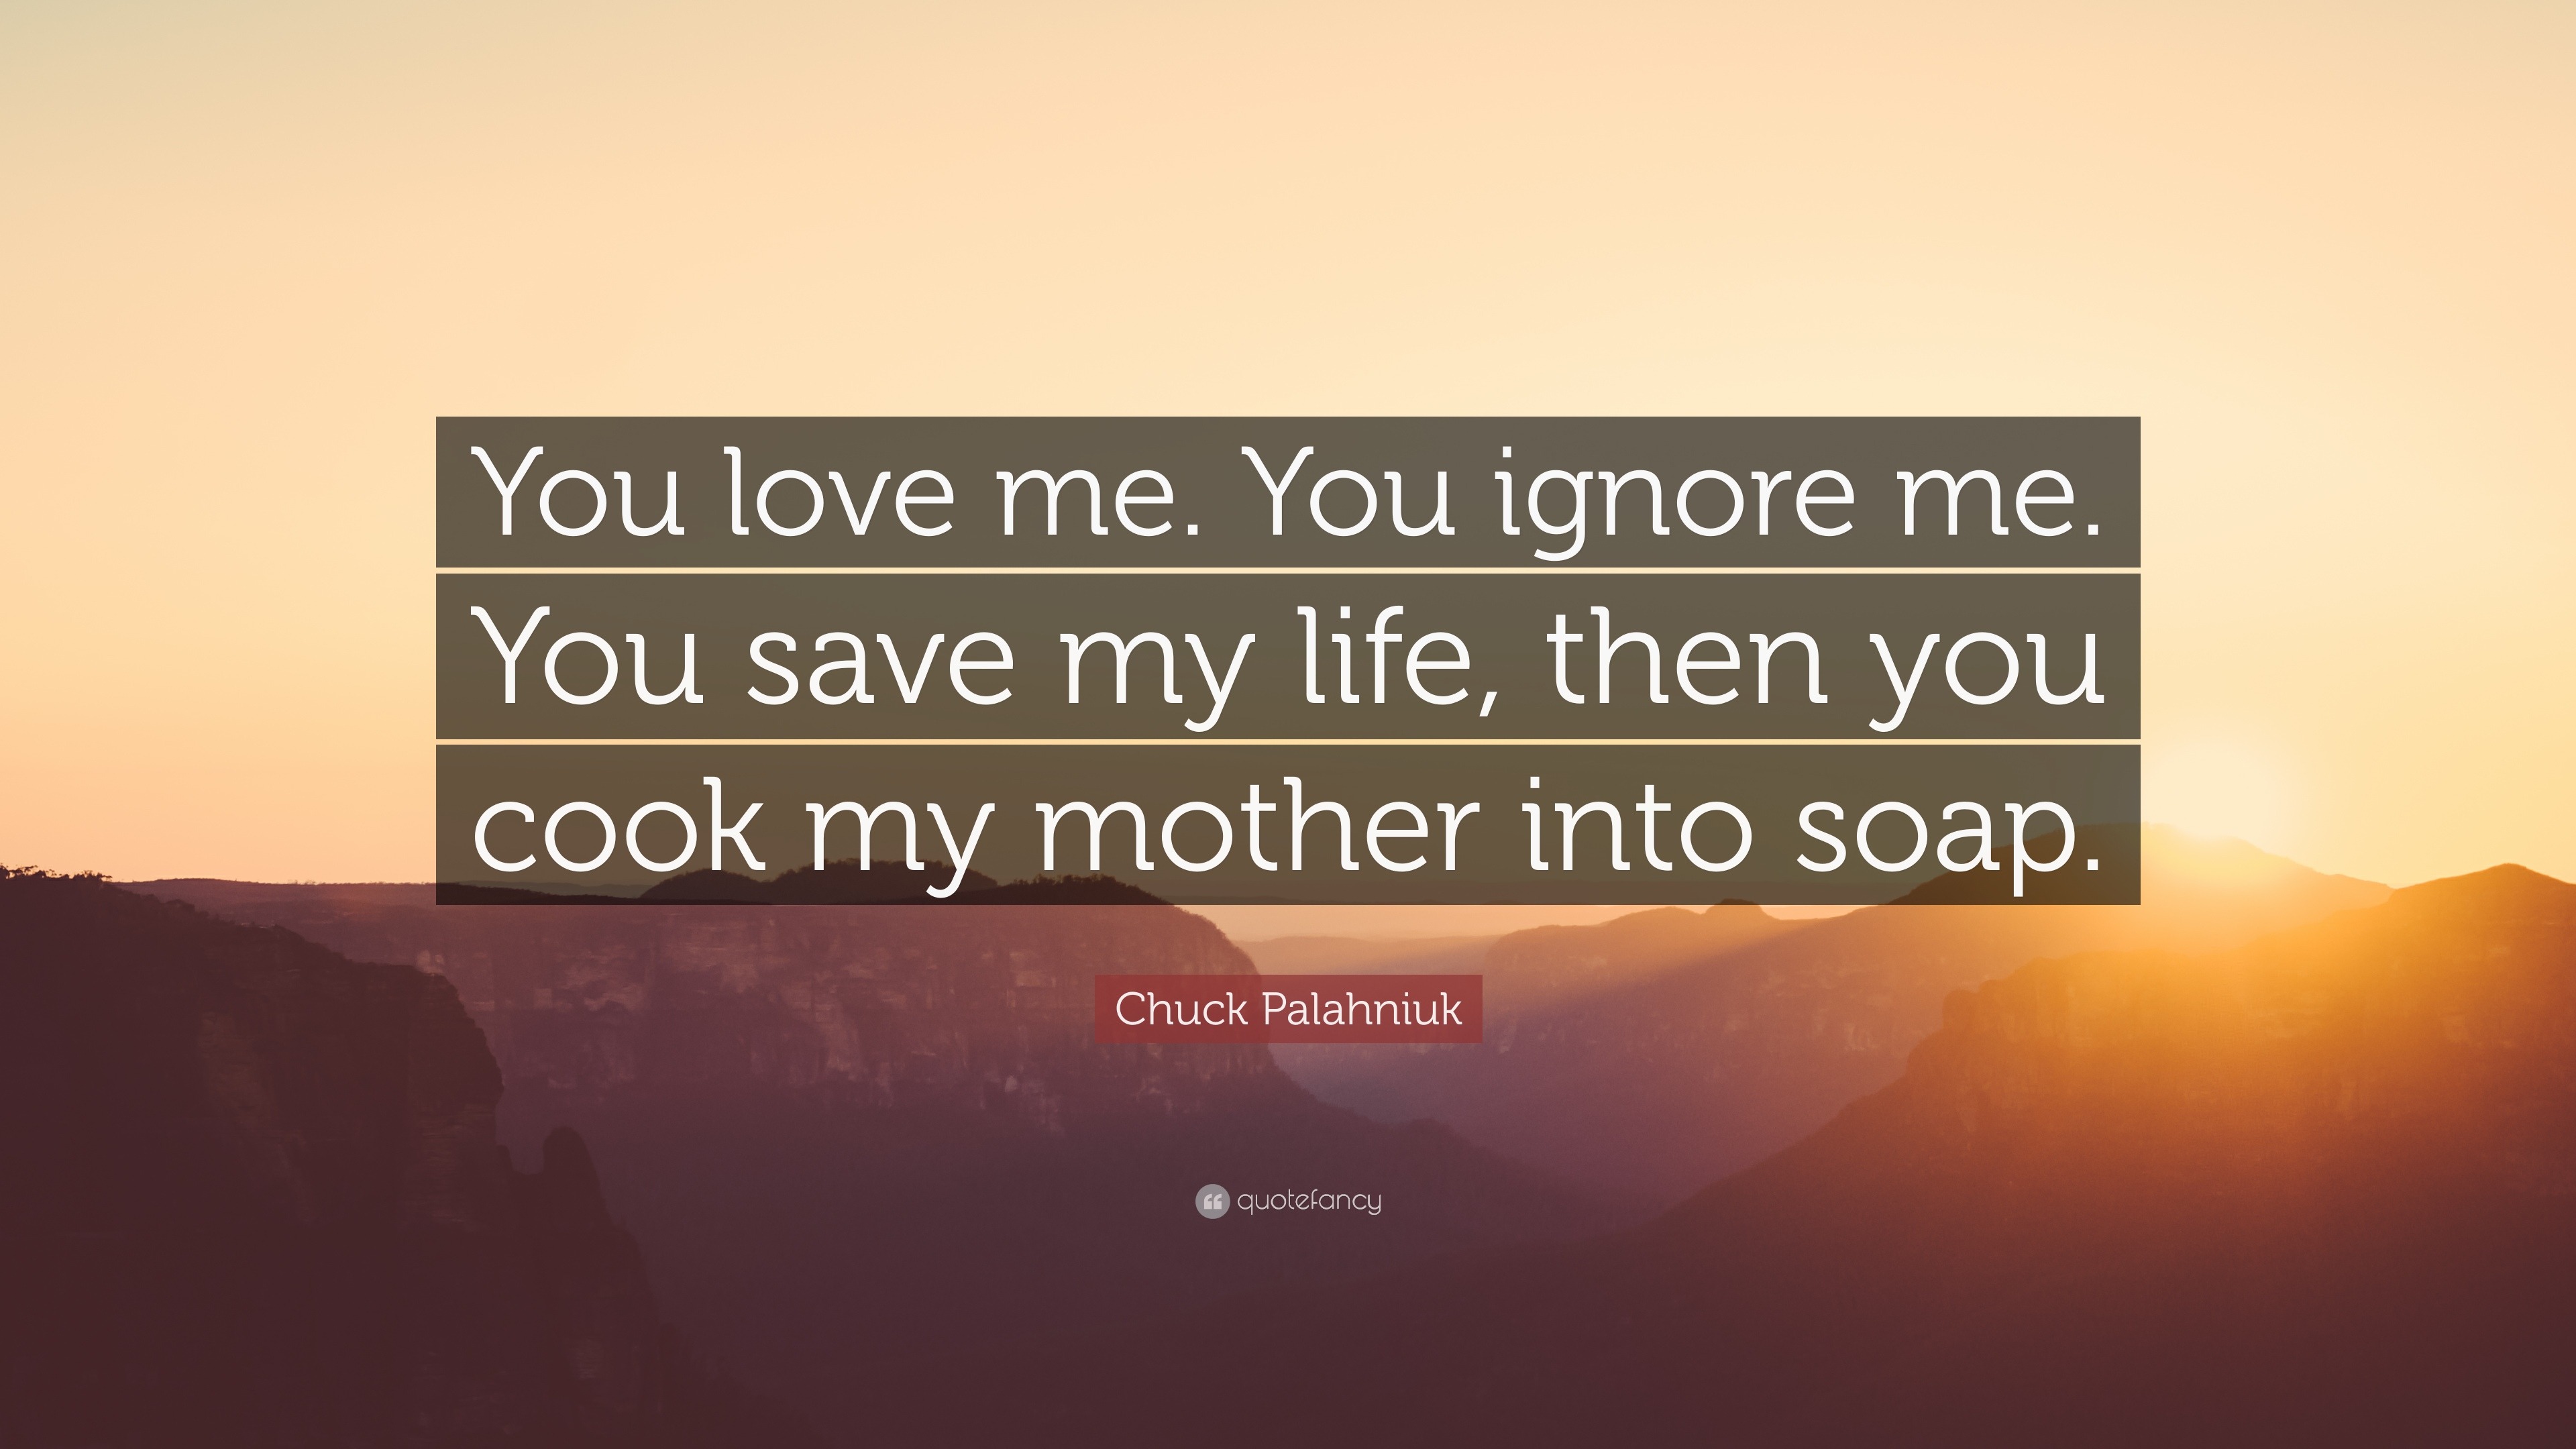 Chuck Palahniuk Quote “You love me You ignore me You save my